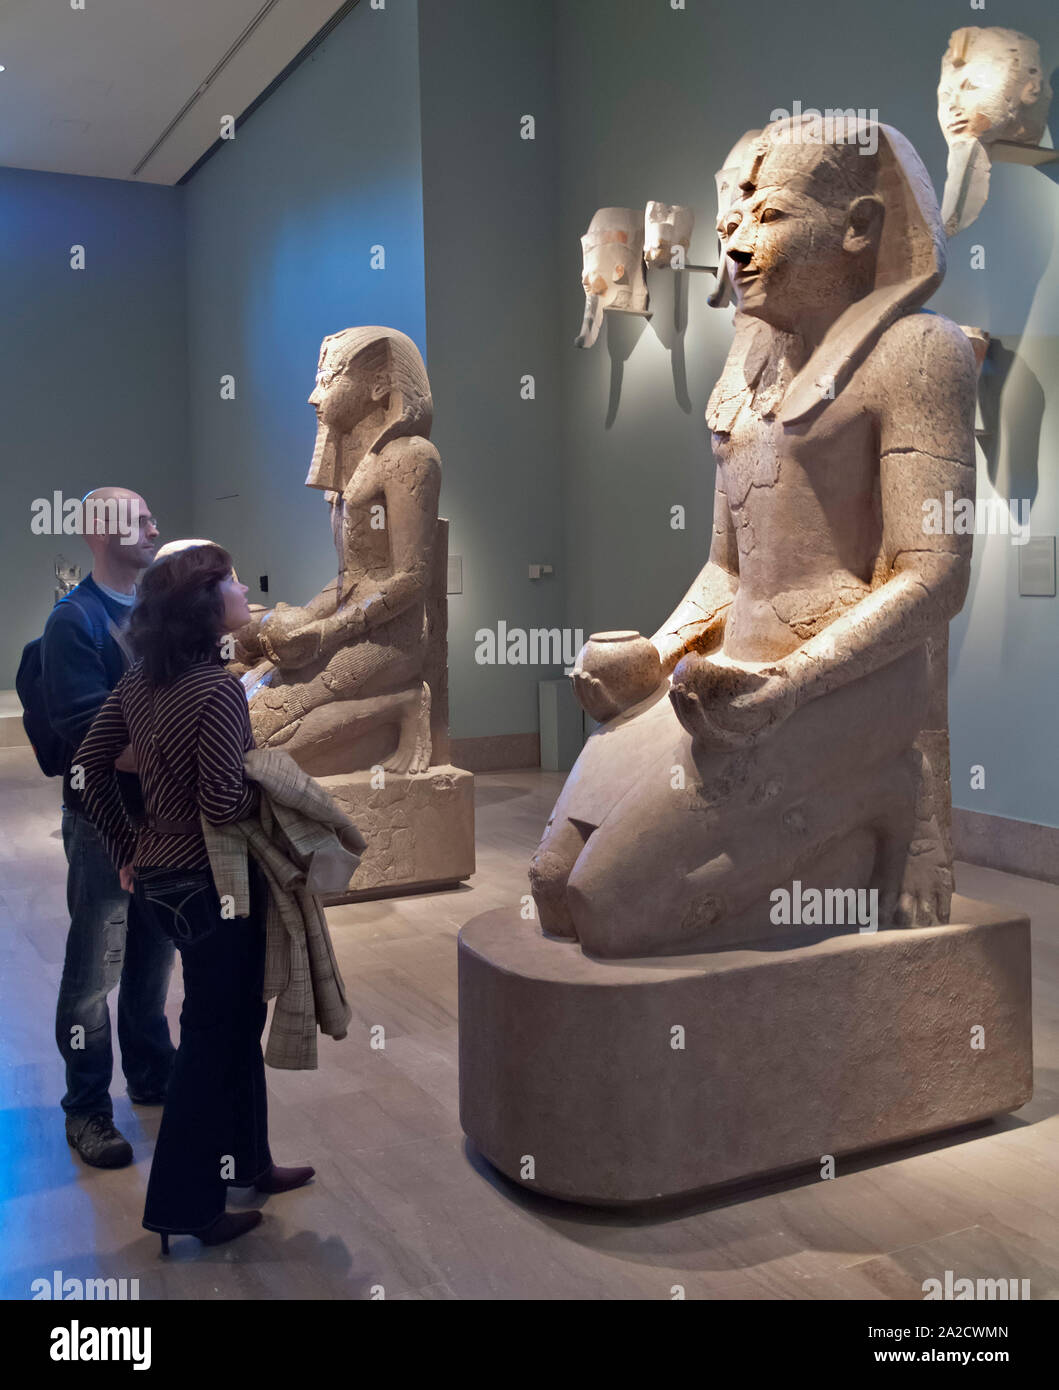 Ancient Egyptian sculptures in the MET, New York. Stock Photo